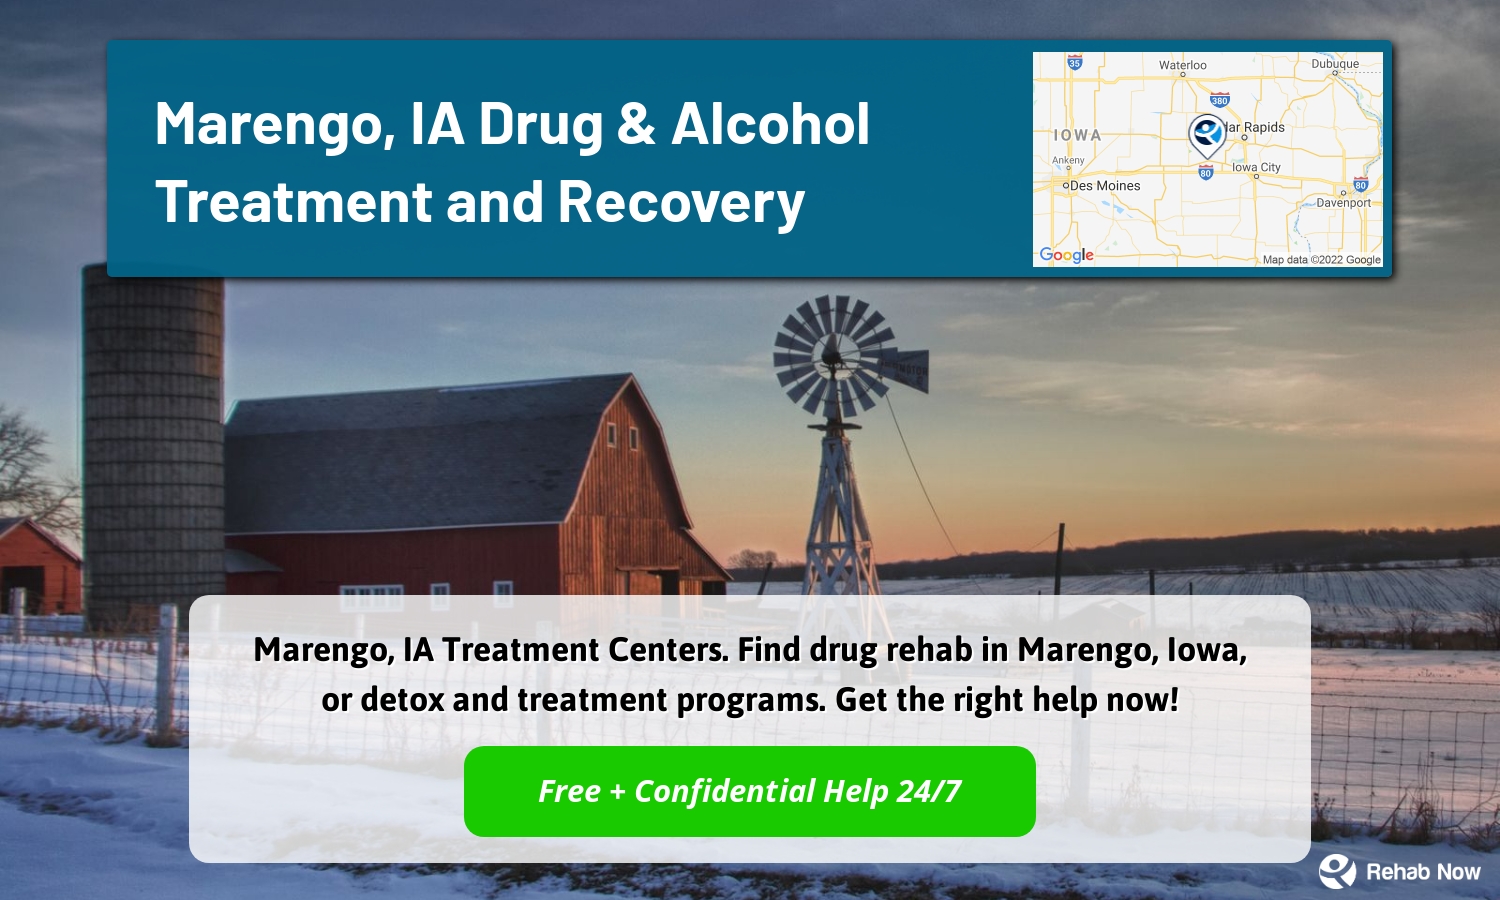 Marengo, IA Treatment Centers. Find drug rehab in Marengo, Iowa, or detox and treatment programs. Get the right help now!